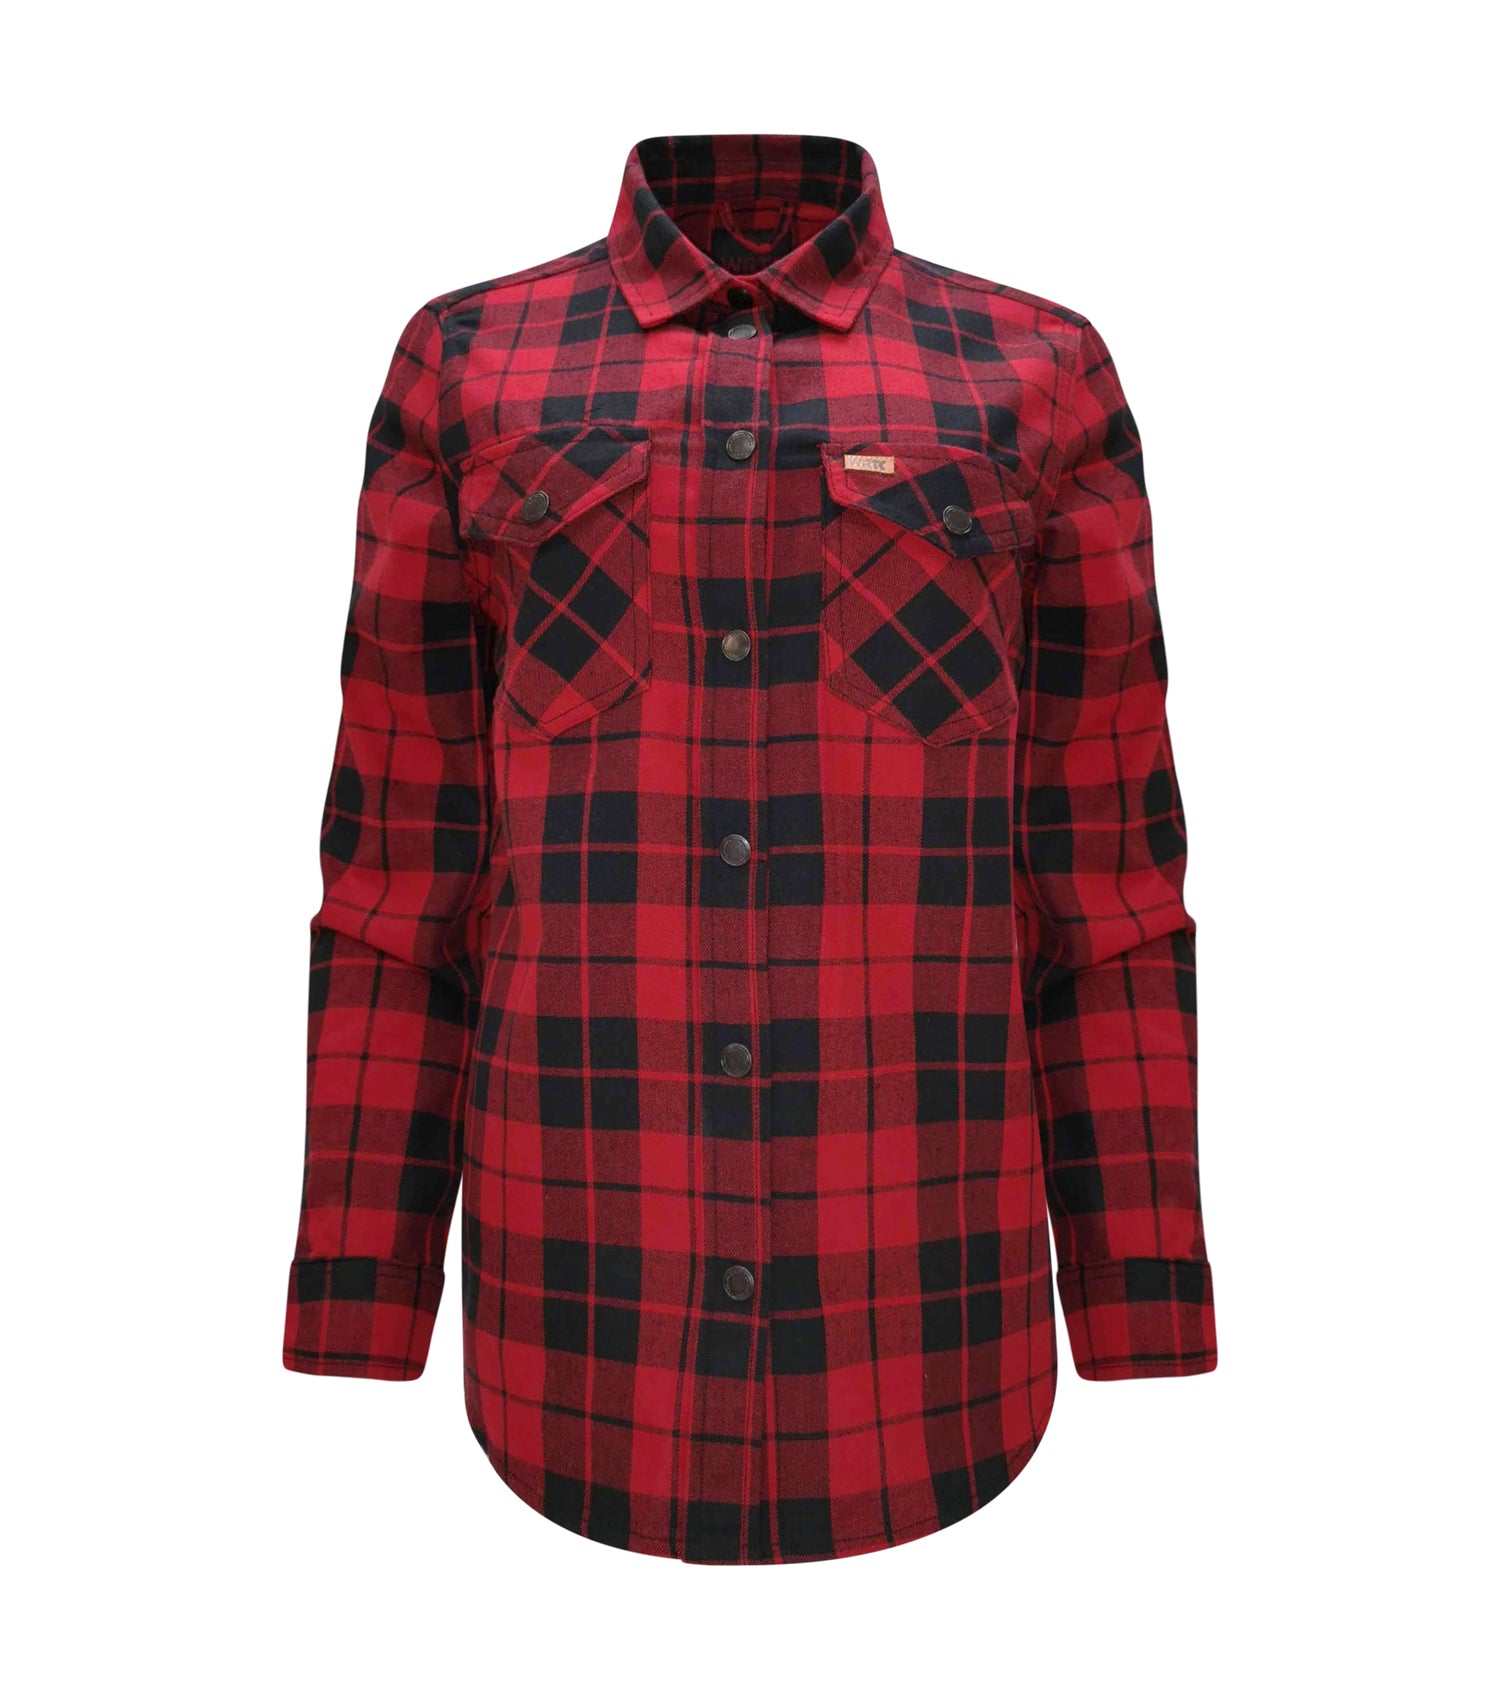 Women's Passion pearl Snap Flannel Shirt - Sand/Blk - New Arrival